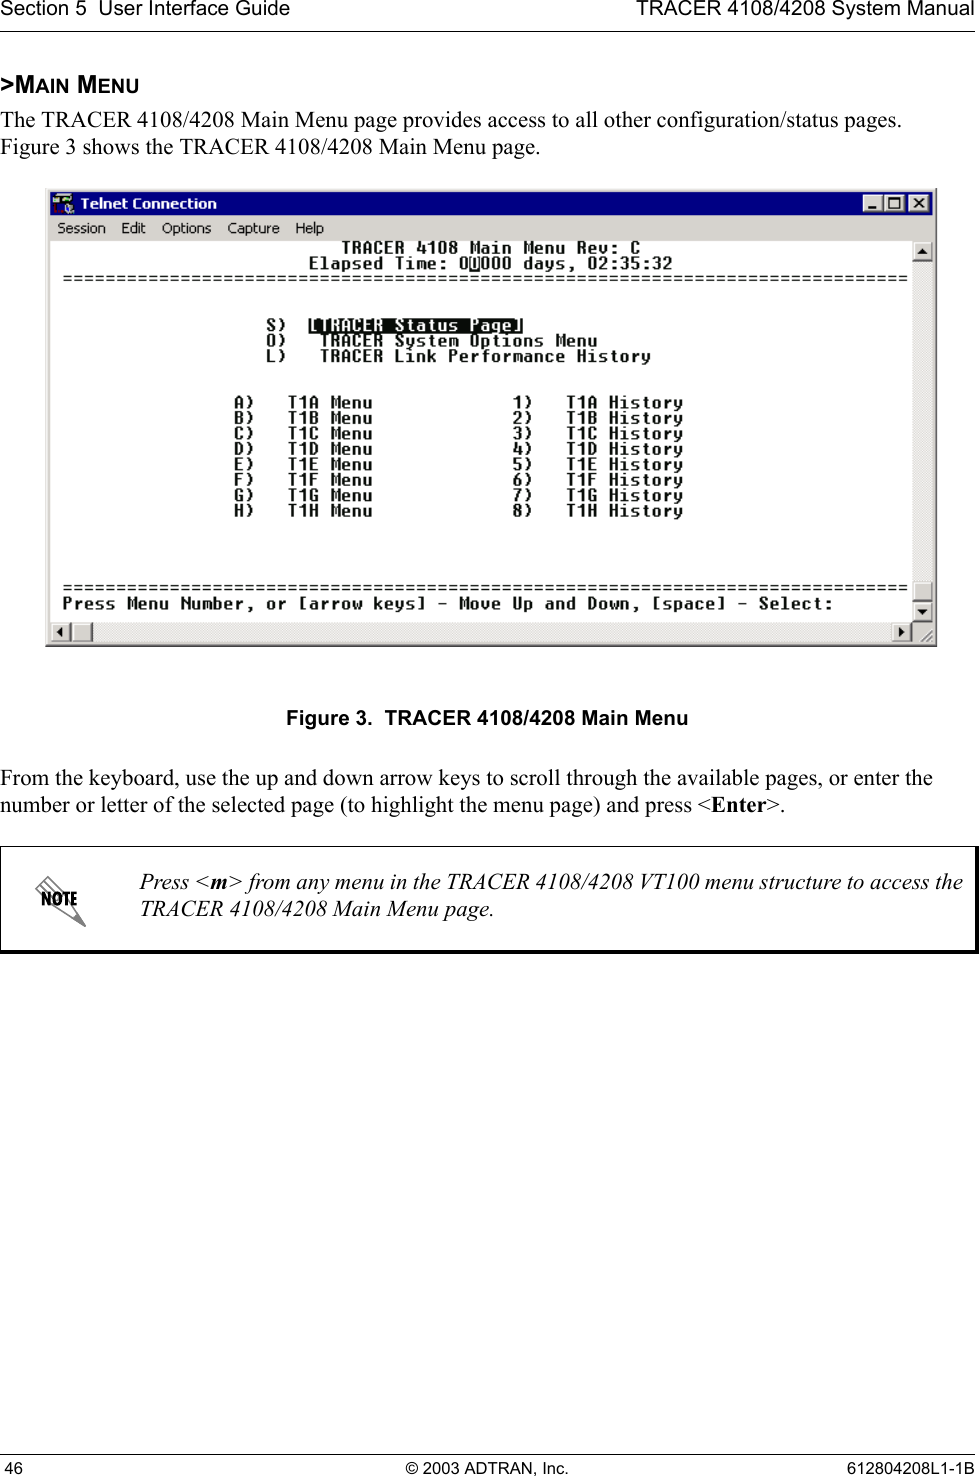 Section 5  User Interface Guide TRACER 4108/4208 System Manual 46 © 2003 ADTRAN, Inc. 612804208L1-1B&gt;MAIN MENUThe TRACER 4108/4208 Main Menu page provides access to all other configuration/status pages. Figure 3 shows the TRACER 4108/4208 Main Menu page.Figure 3.  TRACER 4108/4208 Main MenuFrom the keyboard, use the up and down arrow keys to scroll through the available pages, or enter the number or letter of the selected page (to highlight the menu page) and press &lt;Enter&gt;.Press &lt;m&gt; from any menu in the TRACER 4108/4208 VT100 menu structure to access the TRACER 4108/4208 Main Menu page.